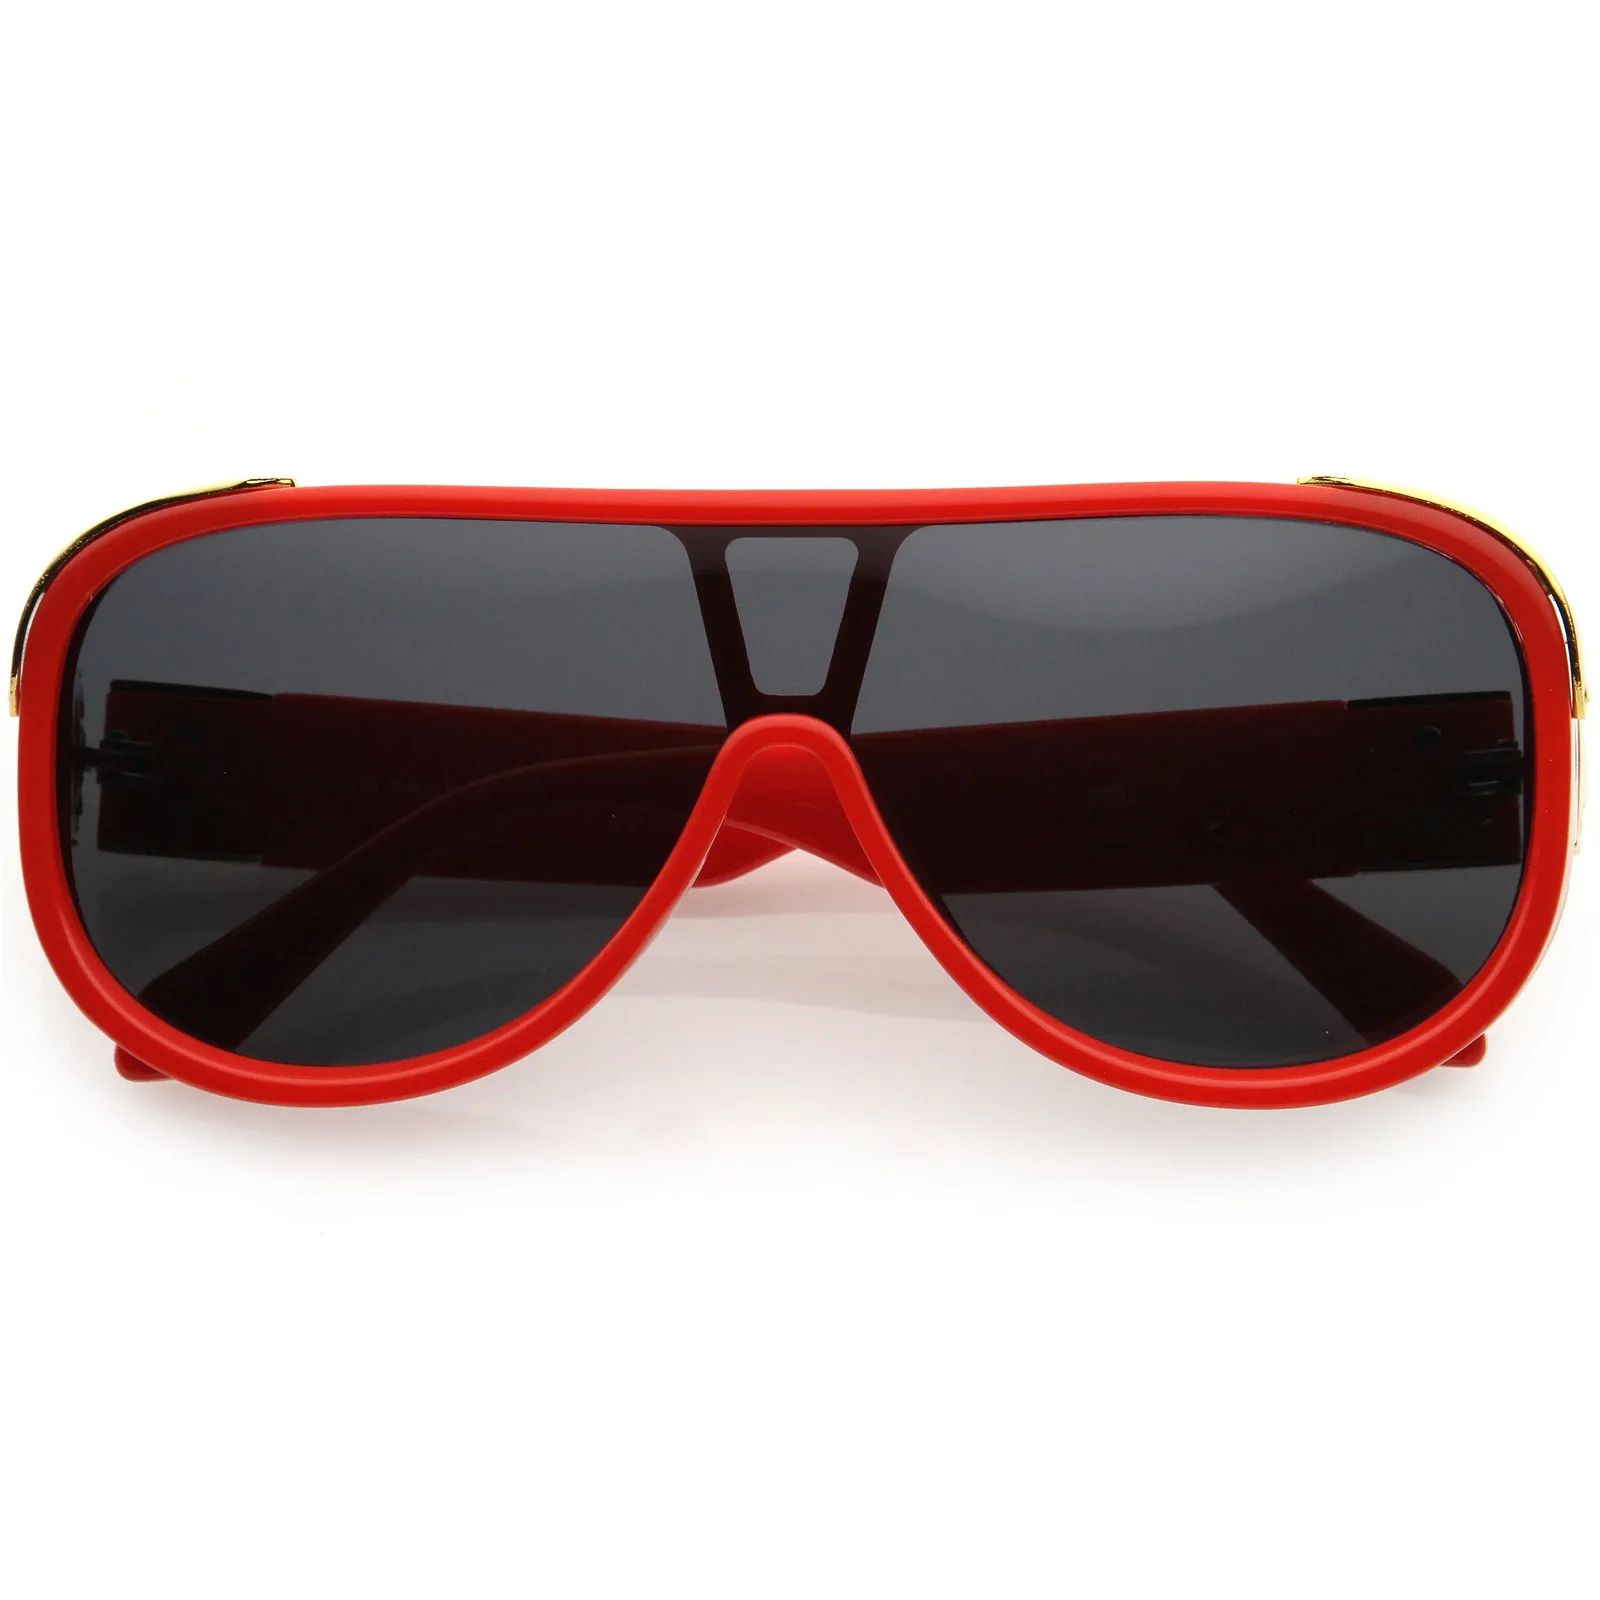 Image of High Fashion Neutral Rounded Lens Flat Top Oversize Shield Sunglasses D101